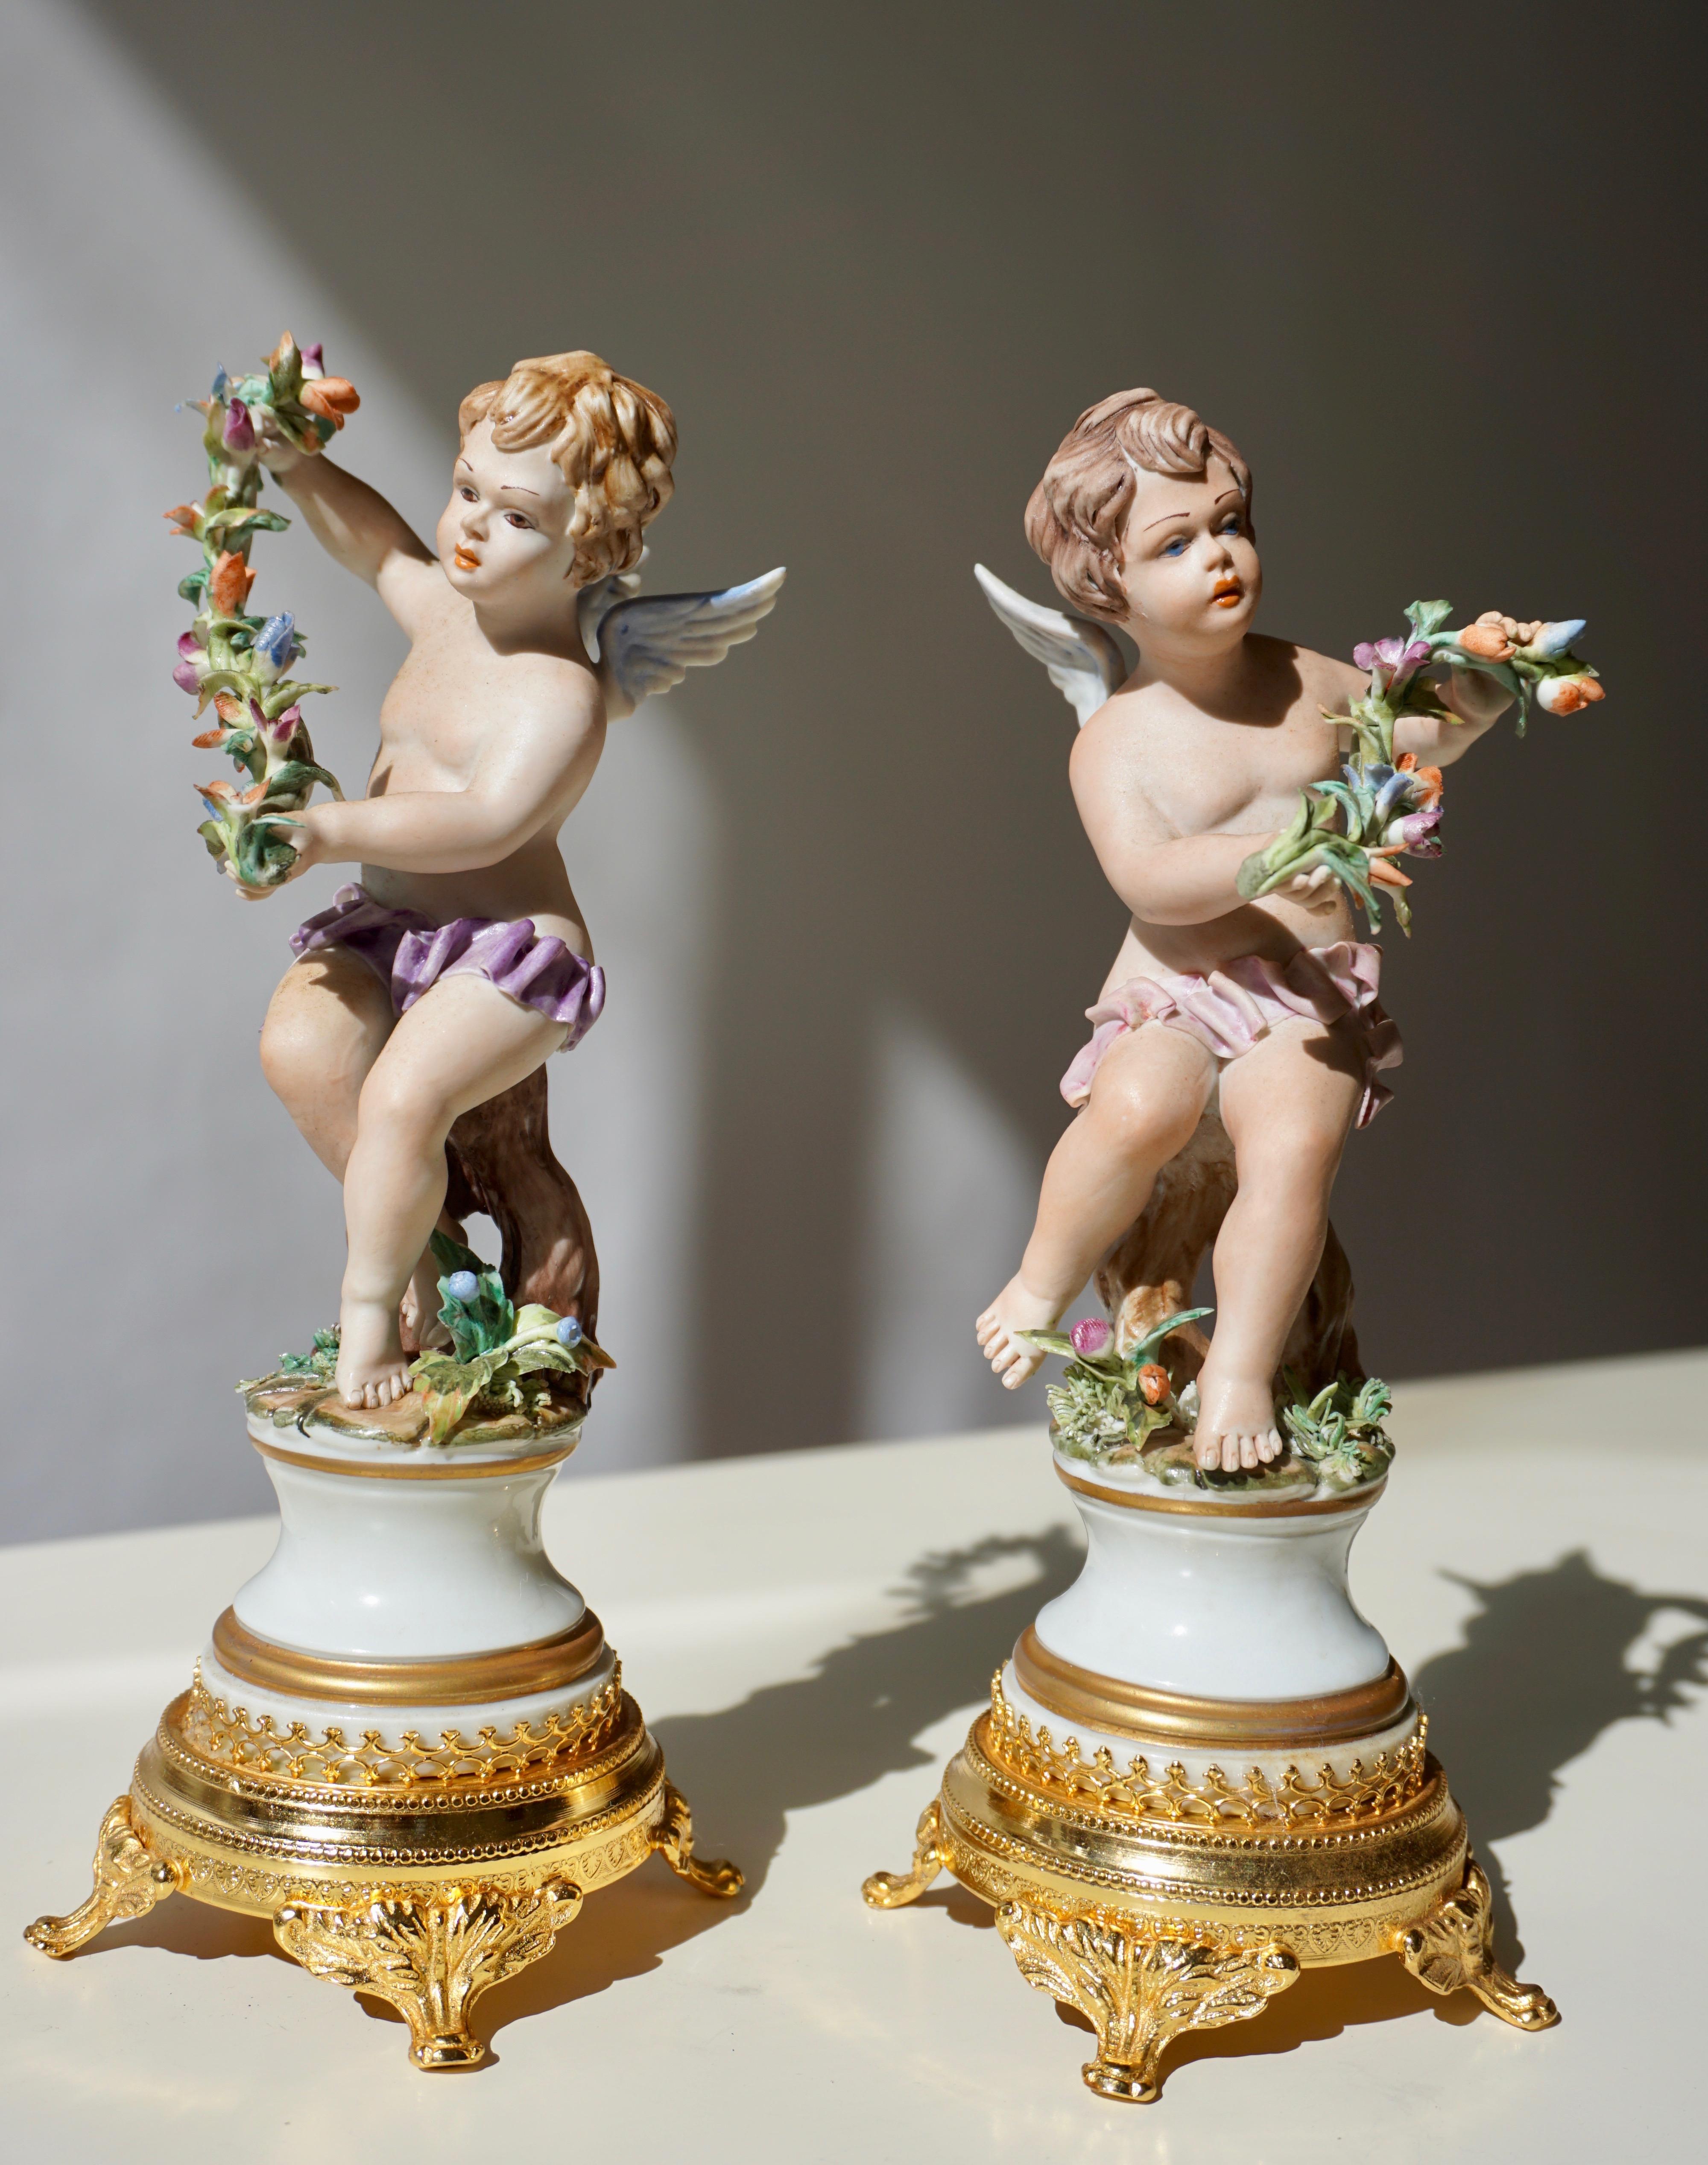 Pair of handmade polychrome porcelain sculptures depicting two winged angels, a pair of fine putti, one holding flowers, Allegory of abundance. Both porcelain figures stand on a golden circular brass base. In excellent condition, both putti figures